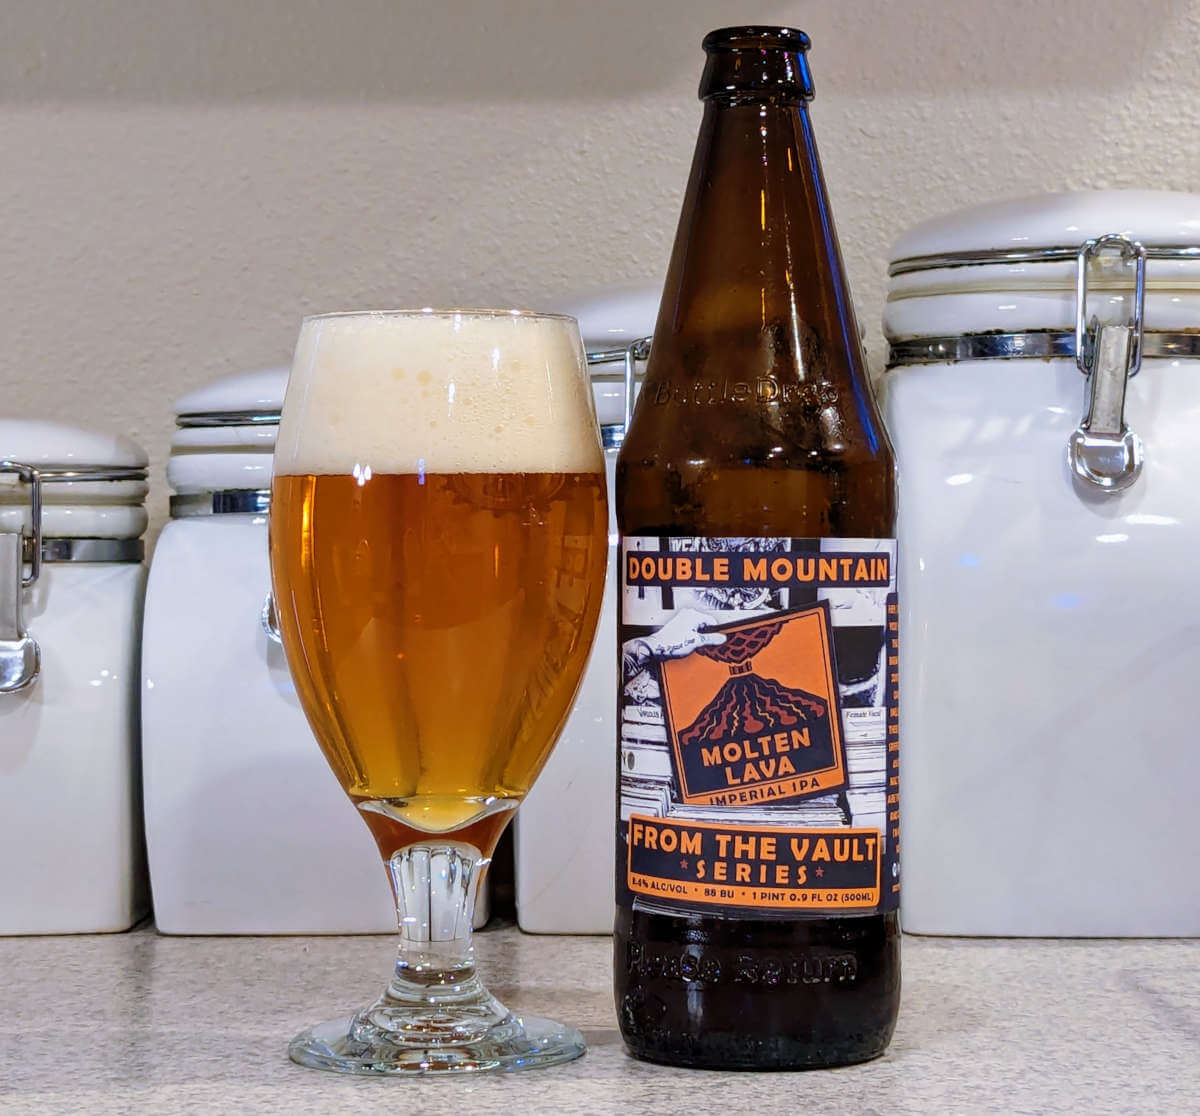 Double Mountain Brewery Molten Lava Imperial IPA (from the vault)